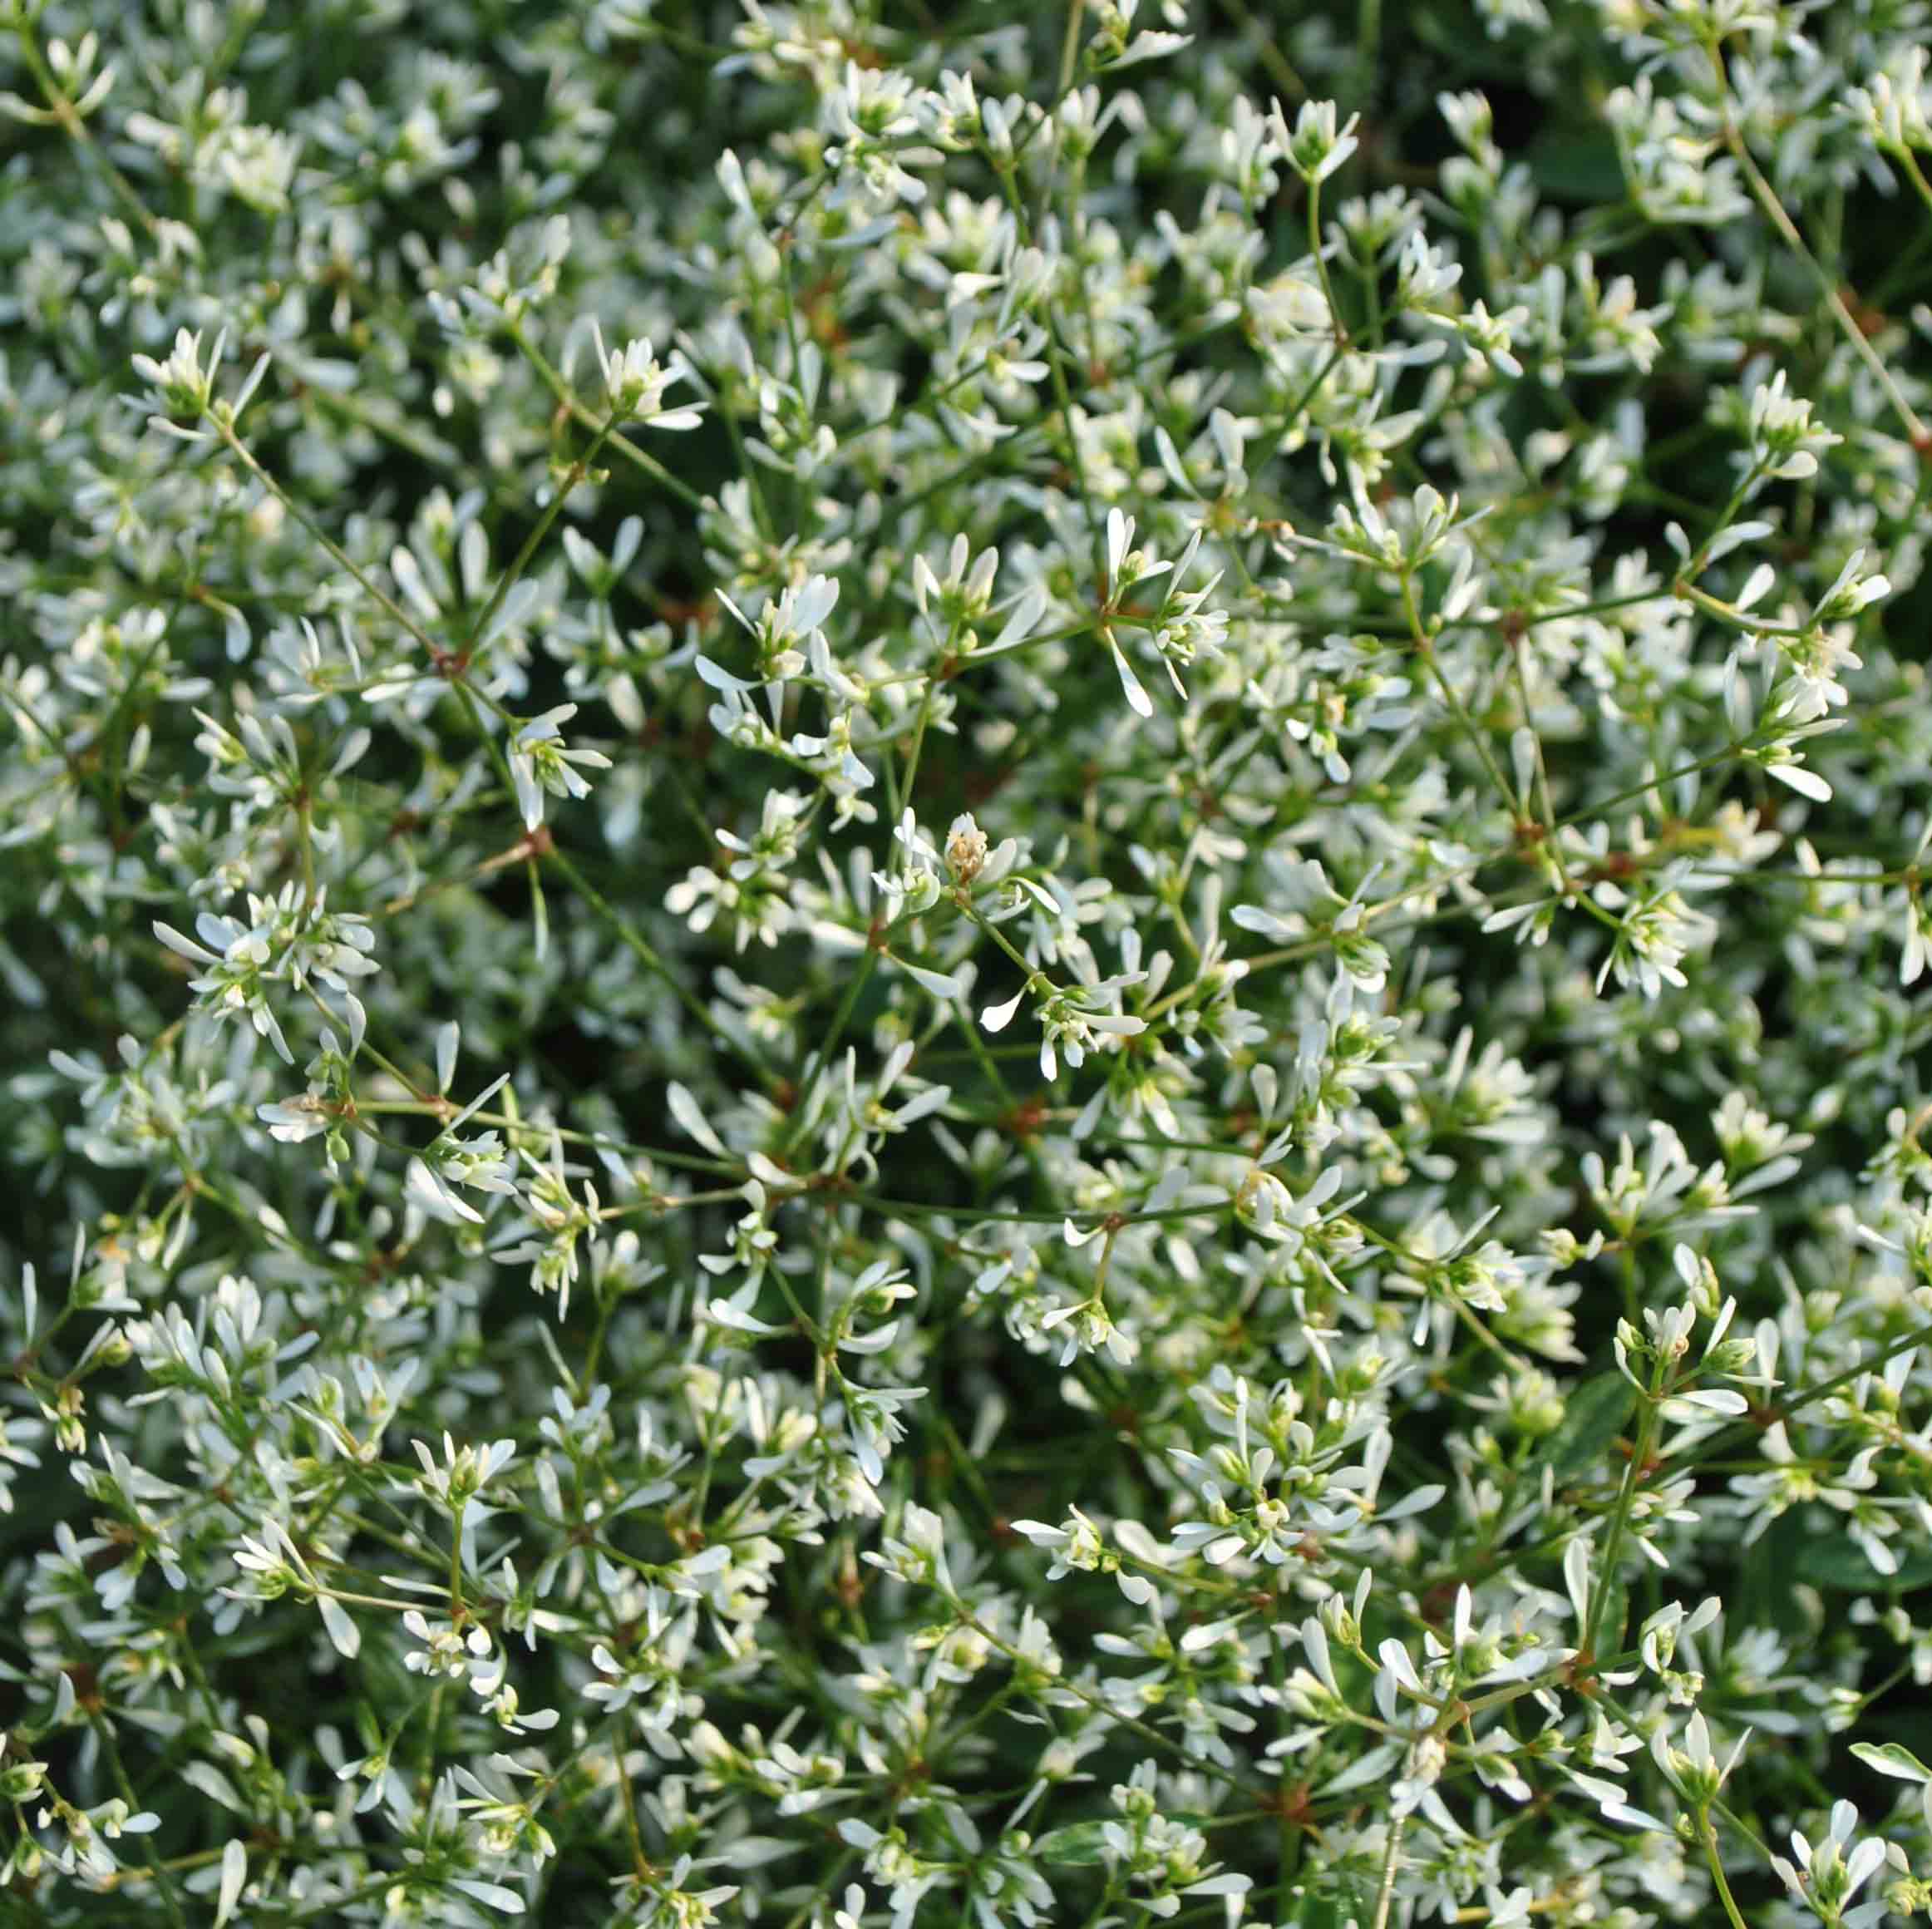 “Over the years, the euphorbias have performed well in our garden. Stardust Super Flash' out-performed the others this summer. The compact plants were covered by countless small white flowers from April through October. The plants were well behaved, not falling over, nor infringing on their neighbors.